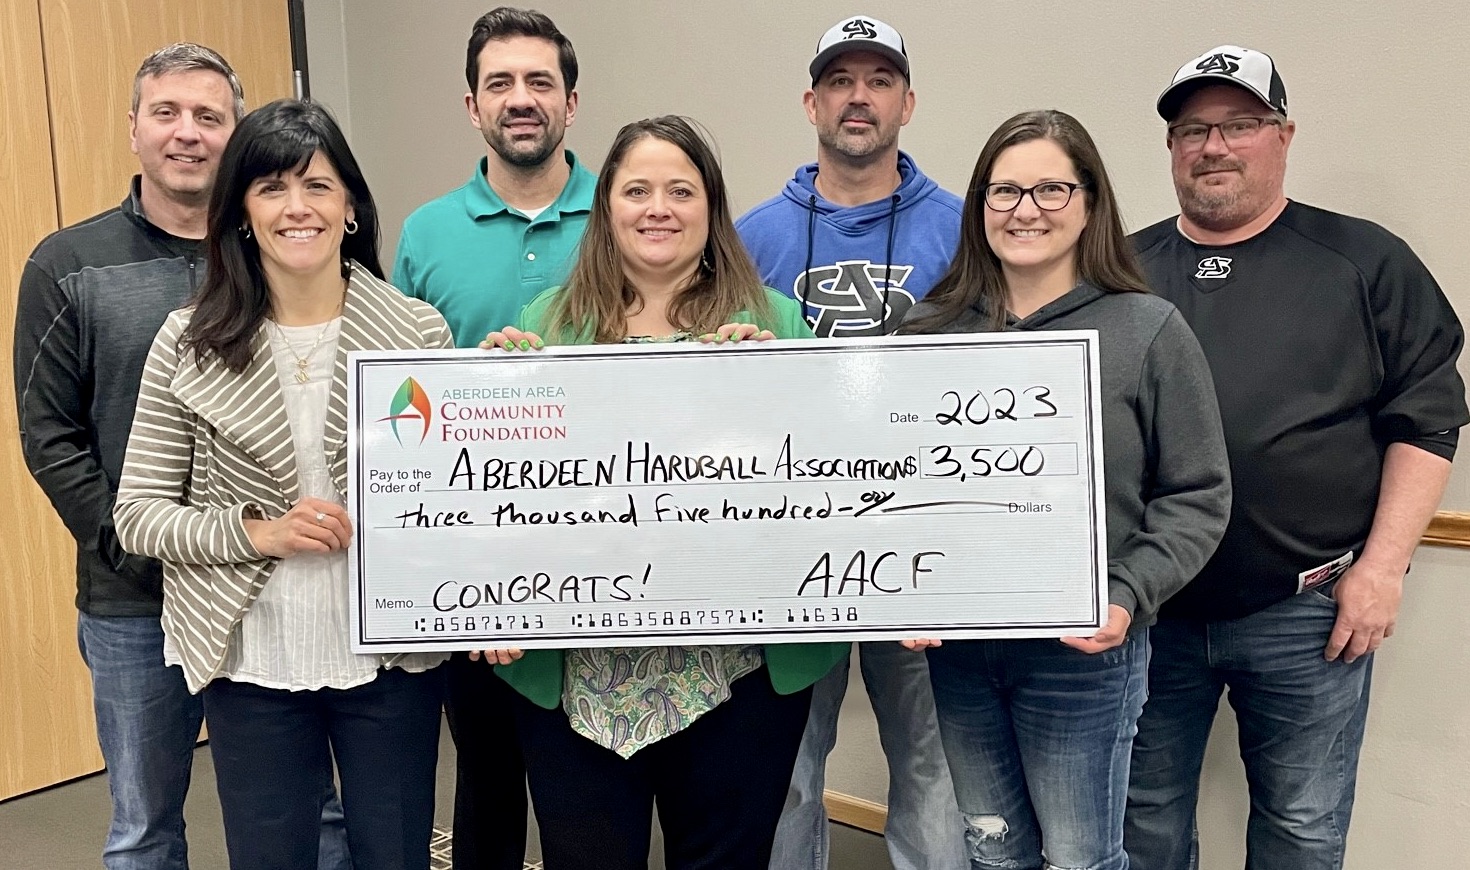 The Aberdeen Area Community Foundation recently provided a grant to the Aberdeen Hardball Association to support its new project to create a traveling team for its youth baseball program. The grant funds will help with equipment purchases and other needs of the program. Pictured for the ceremonial check presentation are, front from left, Aberdeen Area Community Foundation Vice President Megan Biegler, and Aberdeen Hardball Association board members Diane Soderlund and Kelly Ladner; back from left: Aberdeen Hardball Association board members Steve Stickelmyer, Joel Welke, Eric Borge and Troy Woehl. Photo courtesy of Aberdeen Area Community Foundation